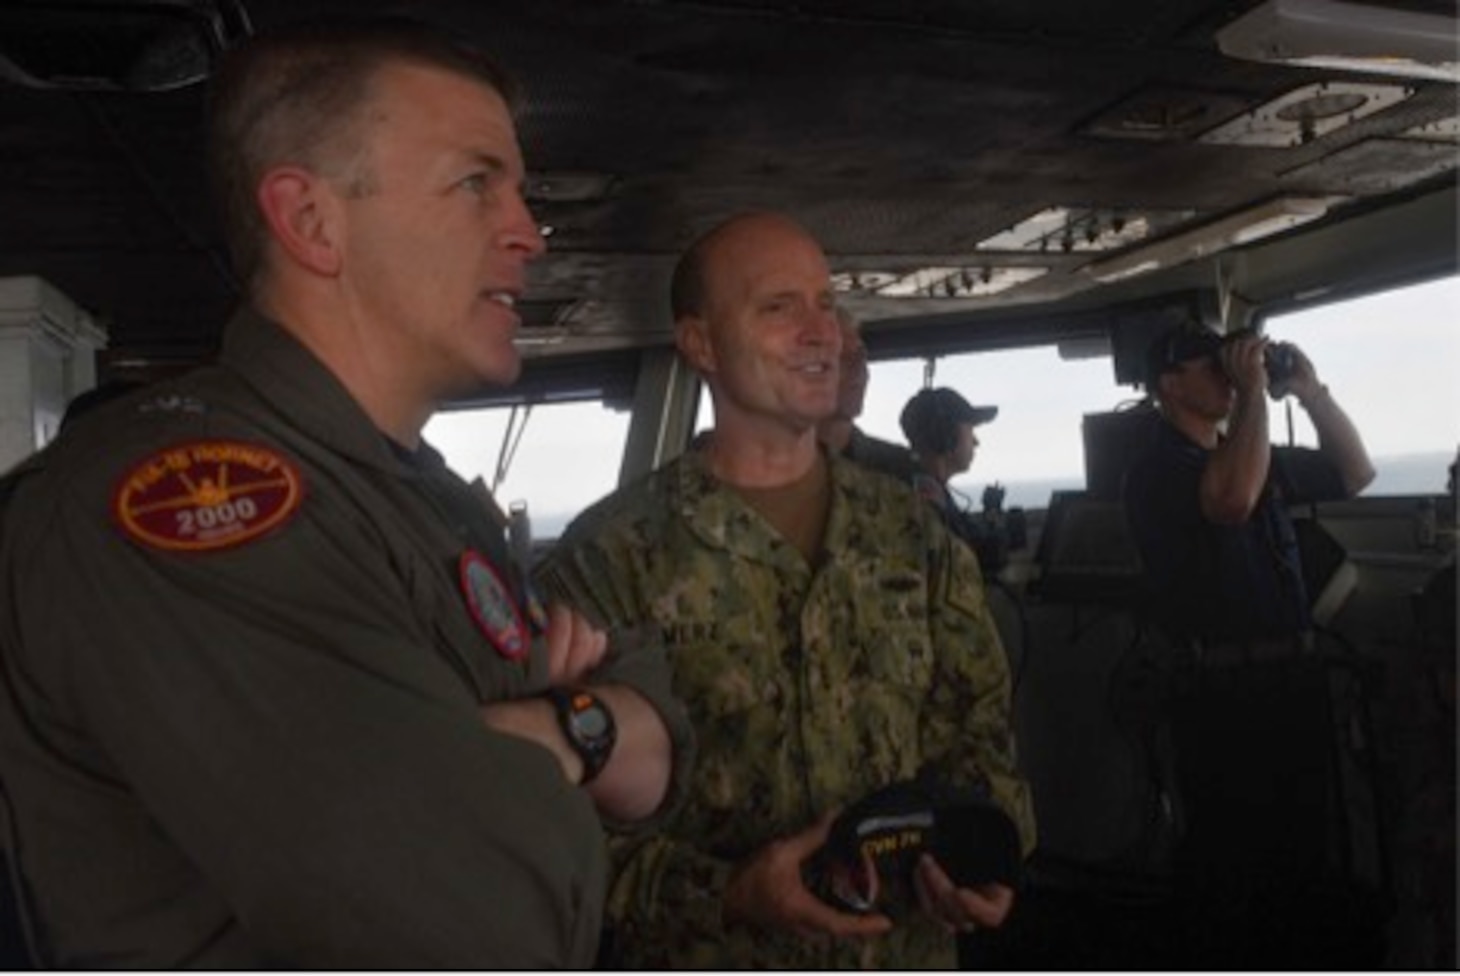 PHILIPPINE SEA (September 14, 2019) Vice Adm. William R. Merz, Commander, 7th Fleet, speaks with Capt. Pat Hannifin, the commanding officer of the Navy’s forward-deployed aircraft carrier USS Ronald Reagan (CVN 76), while touring the Reagan. USS Ronald Reagan, the flagship of Carrier Strike Group 5, provides a combat-ready force that protects and defends the collective maritime interests of its allies and partners in the Indo-Asia-Pacific region.